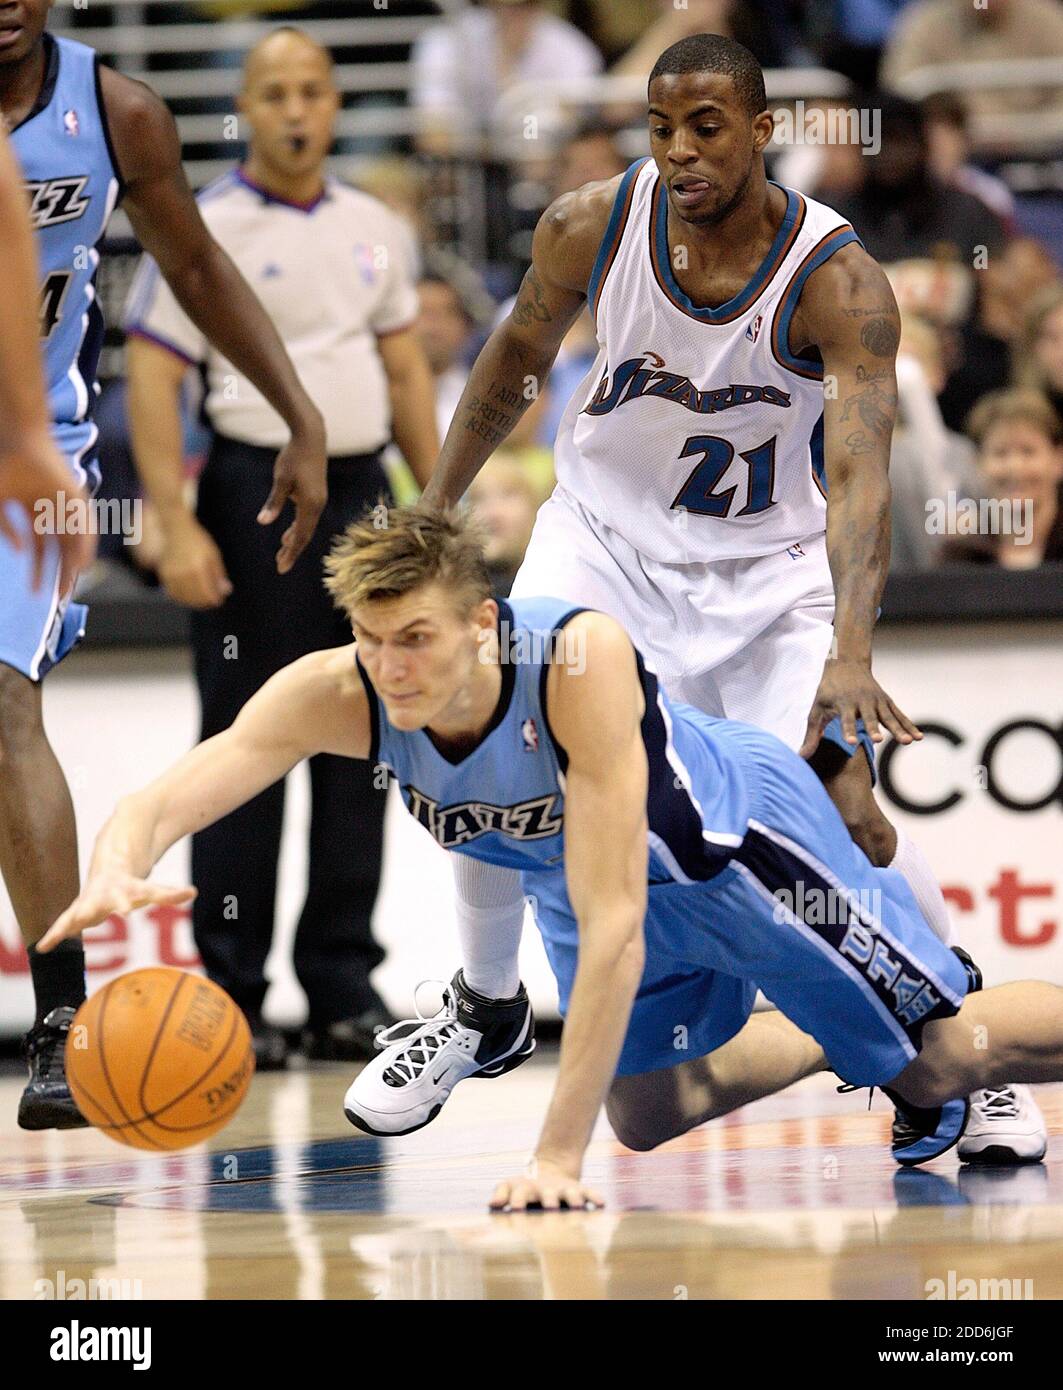 NO FILM, NO VIDEO, NO TV, NO DOCUMENTARY - Utah Jazz Andrei Kirilenko (47) dives for a loose ball in front of Washington Wizards Donell Taylor (21) during their game played at the Verizon Center in Washington, DC, USA on January 15, 2007. Washington defeated Utah 114-111. Photo by Harry E. Walker/MCT/ABACAPRESS.COM Stock Photo